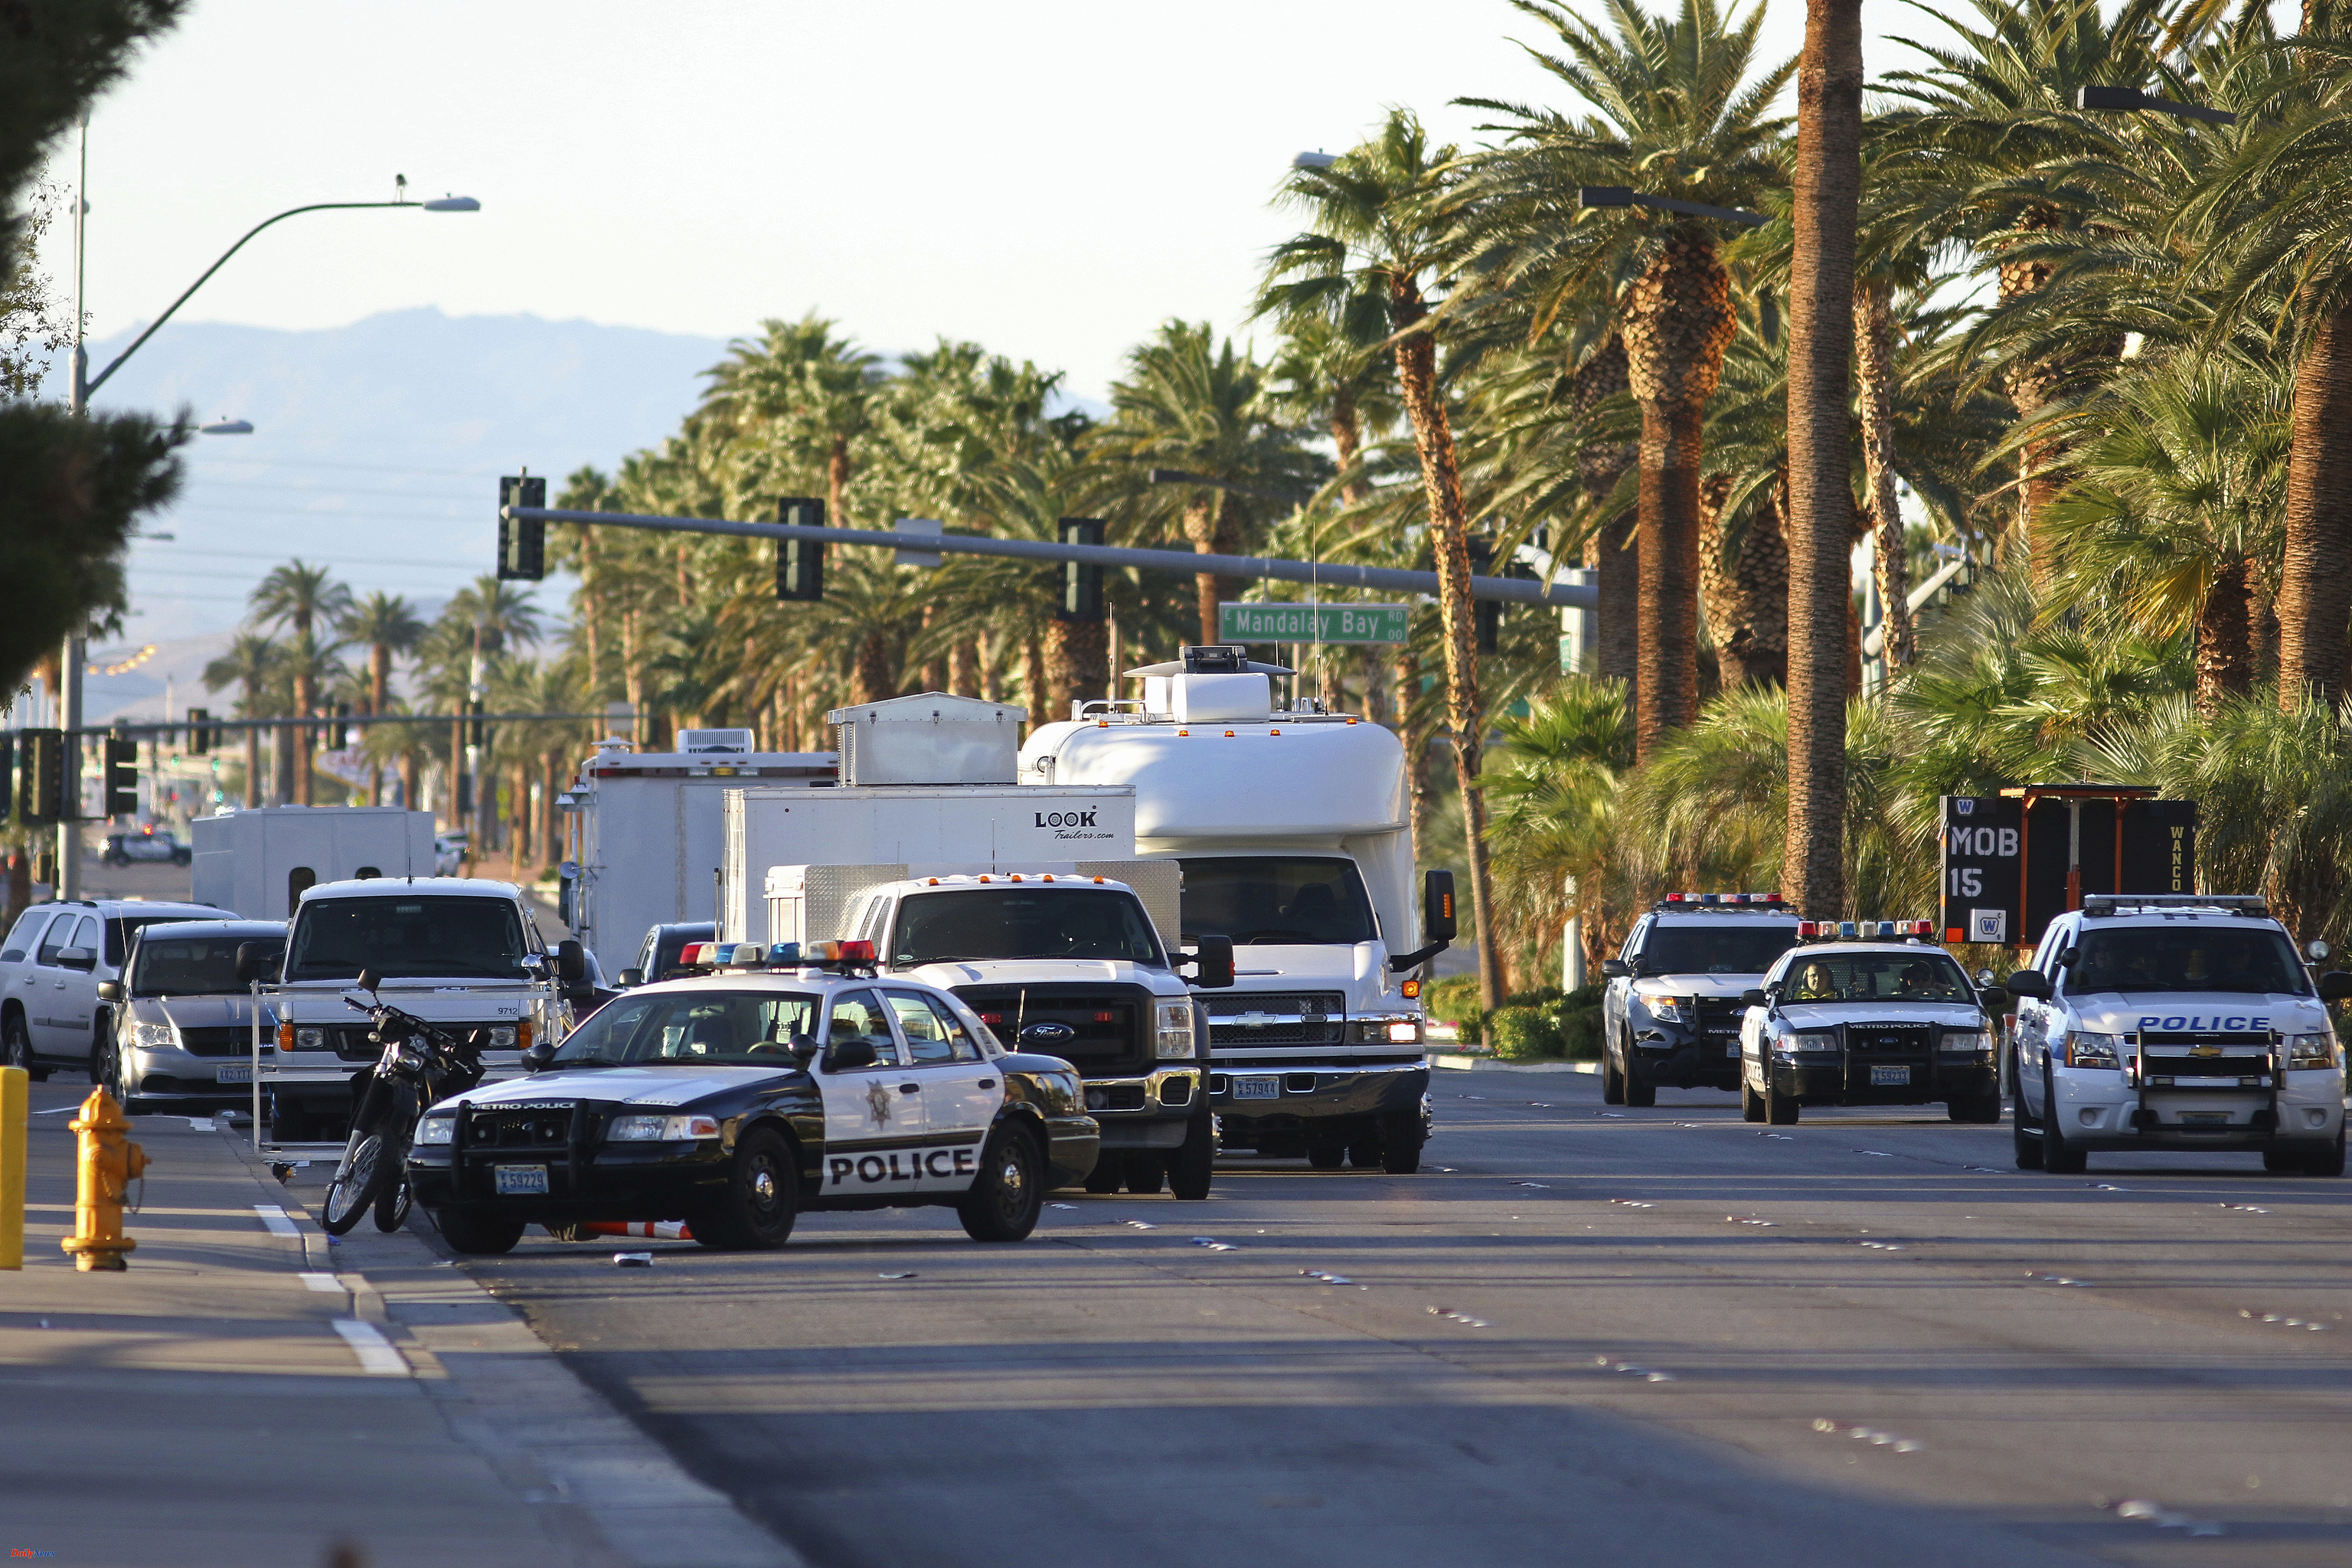 International A shooting at a Las Vegas university leaves "multiple victims", according to Police